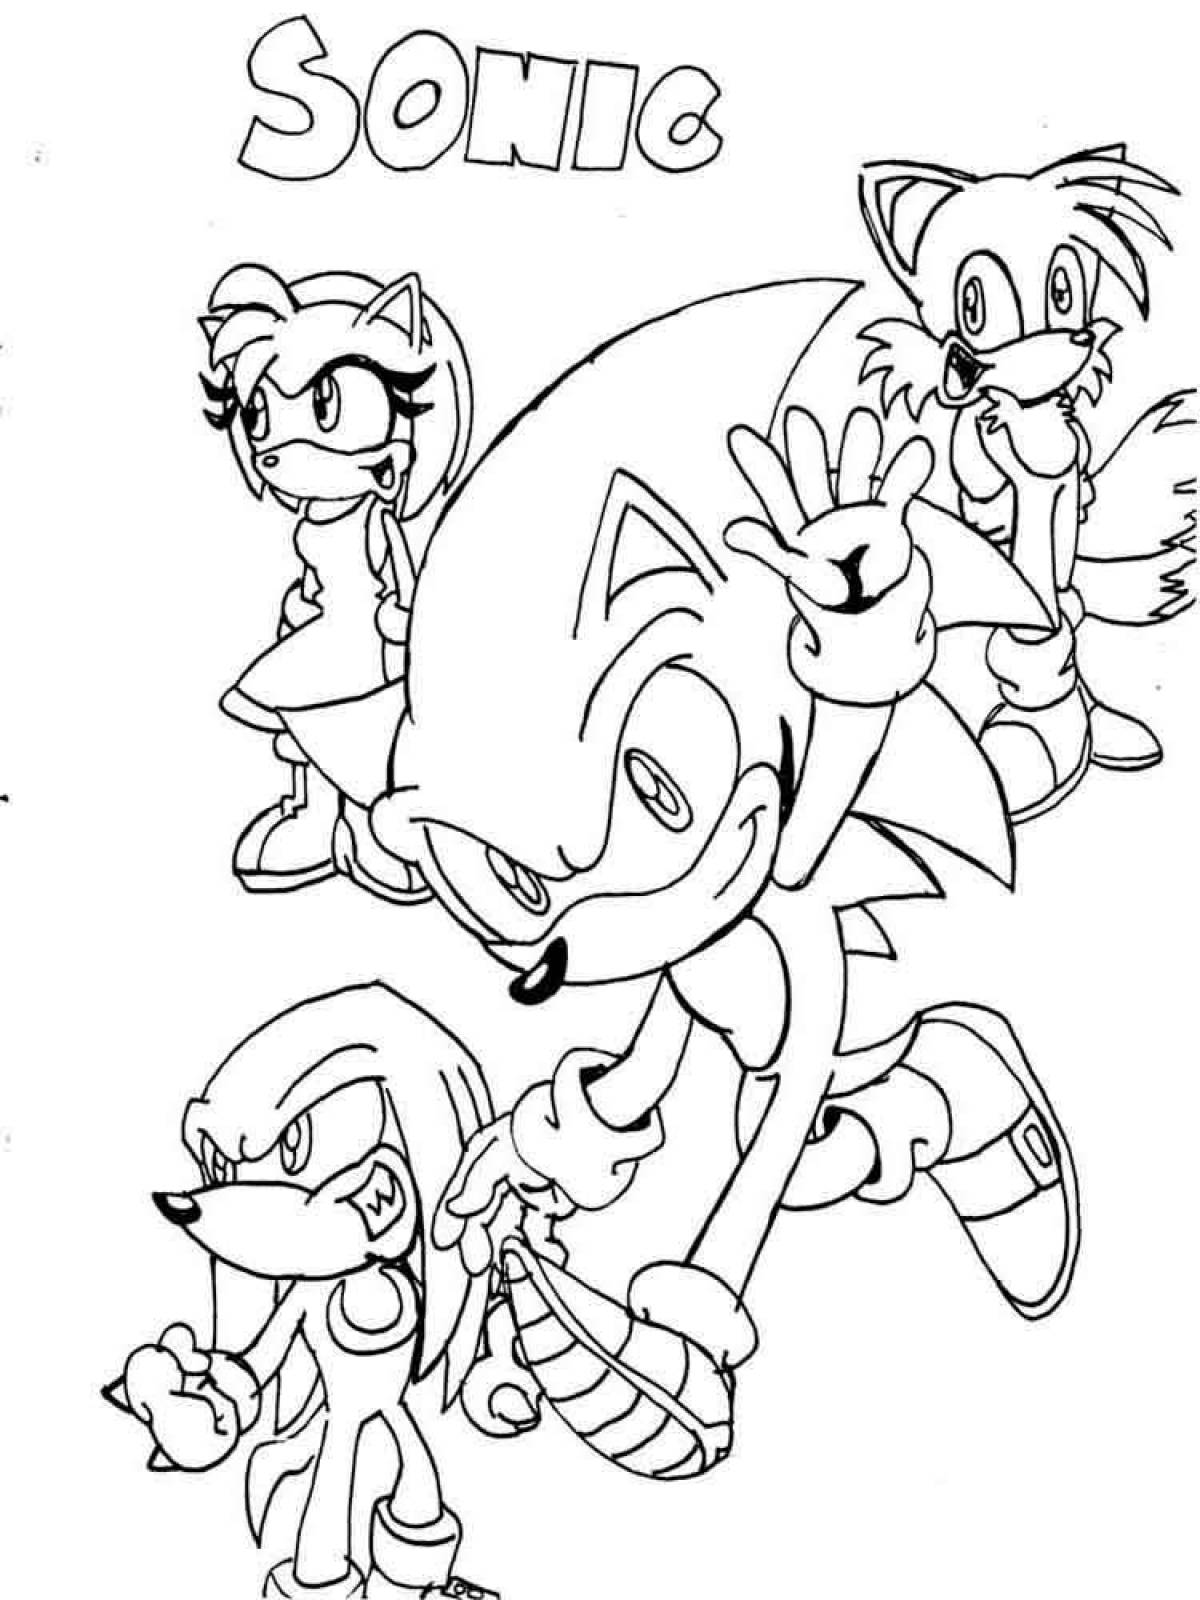 Horny sonic and his friends